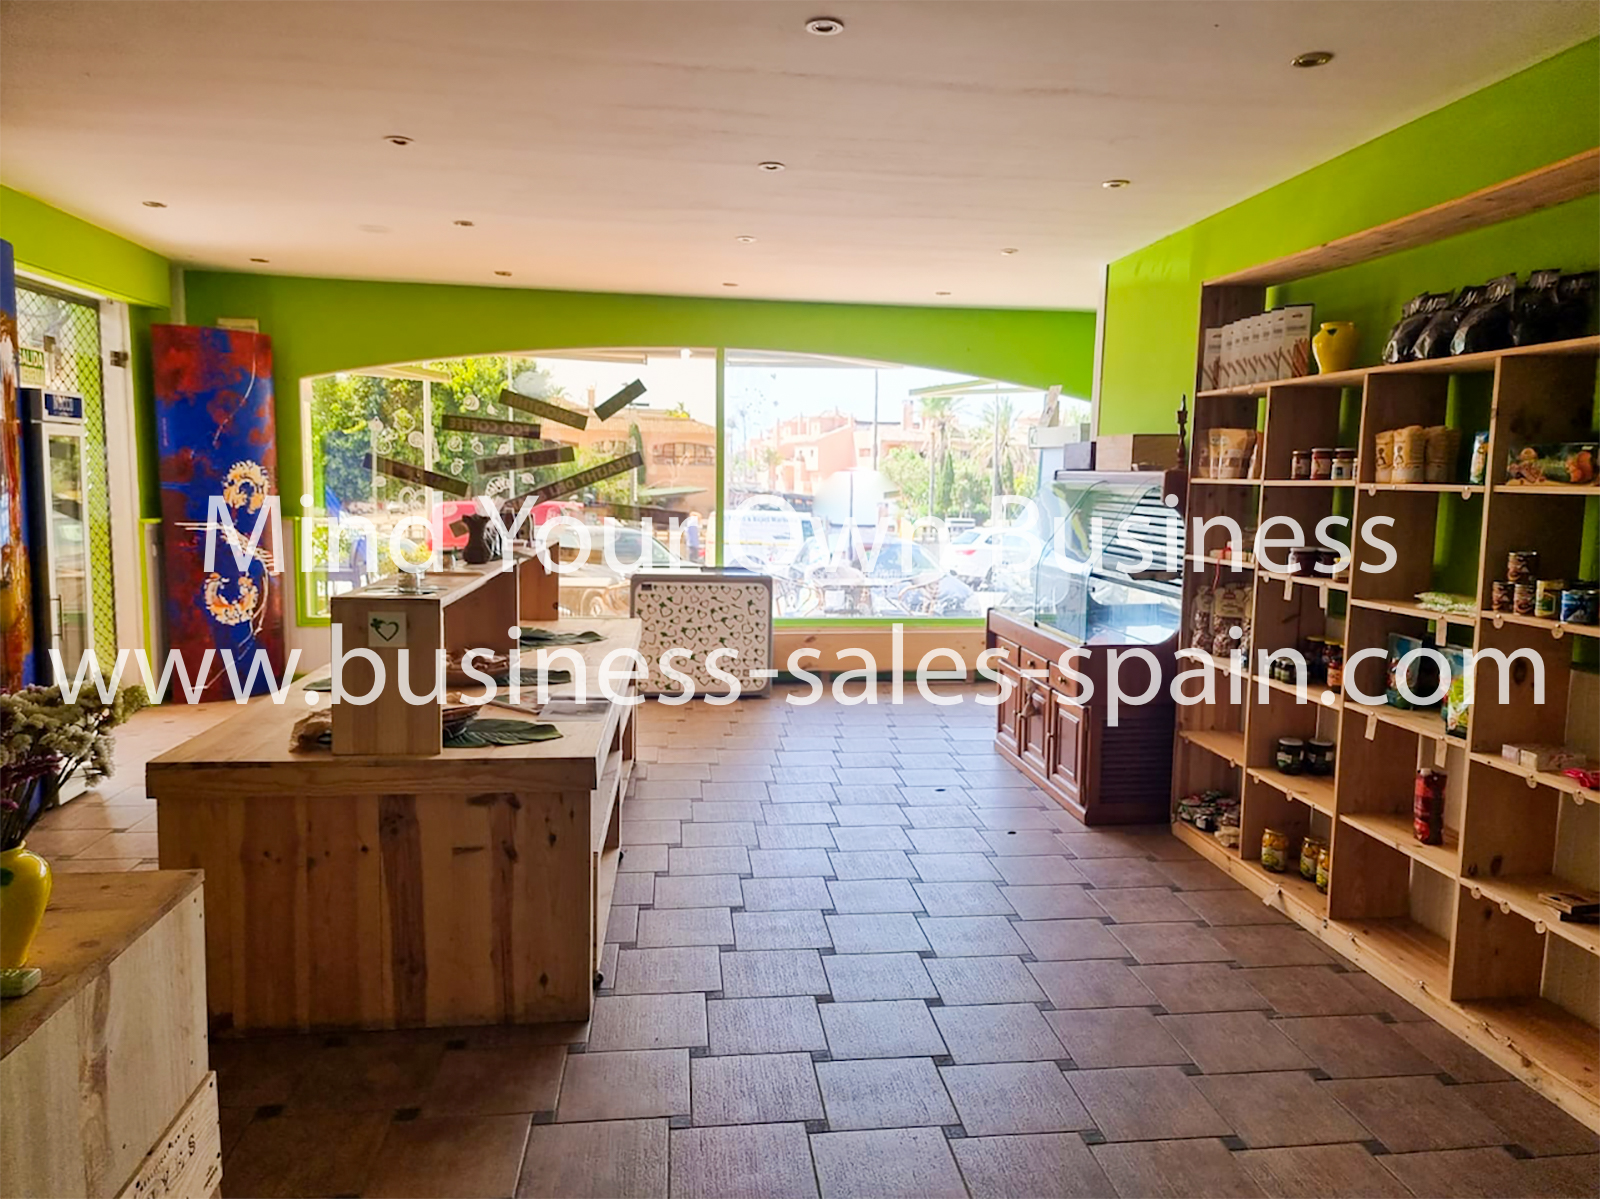 BARGAIN – Modern Café Situated In Busy Commercial Centre Between San Pedro And Estepona.